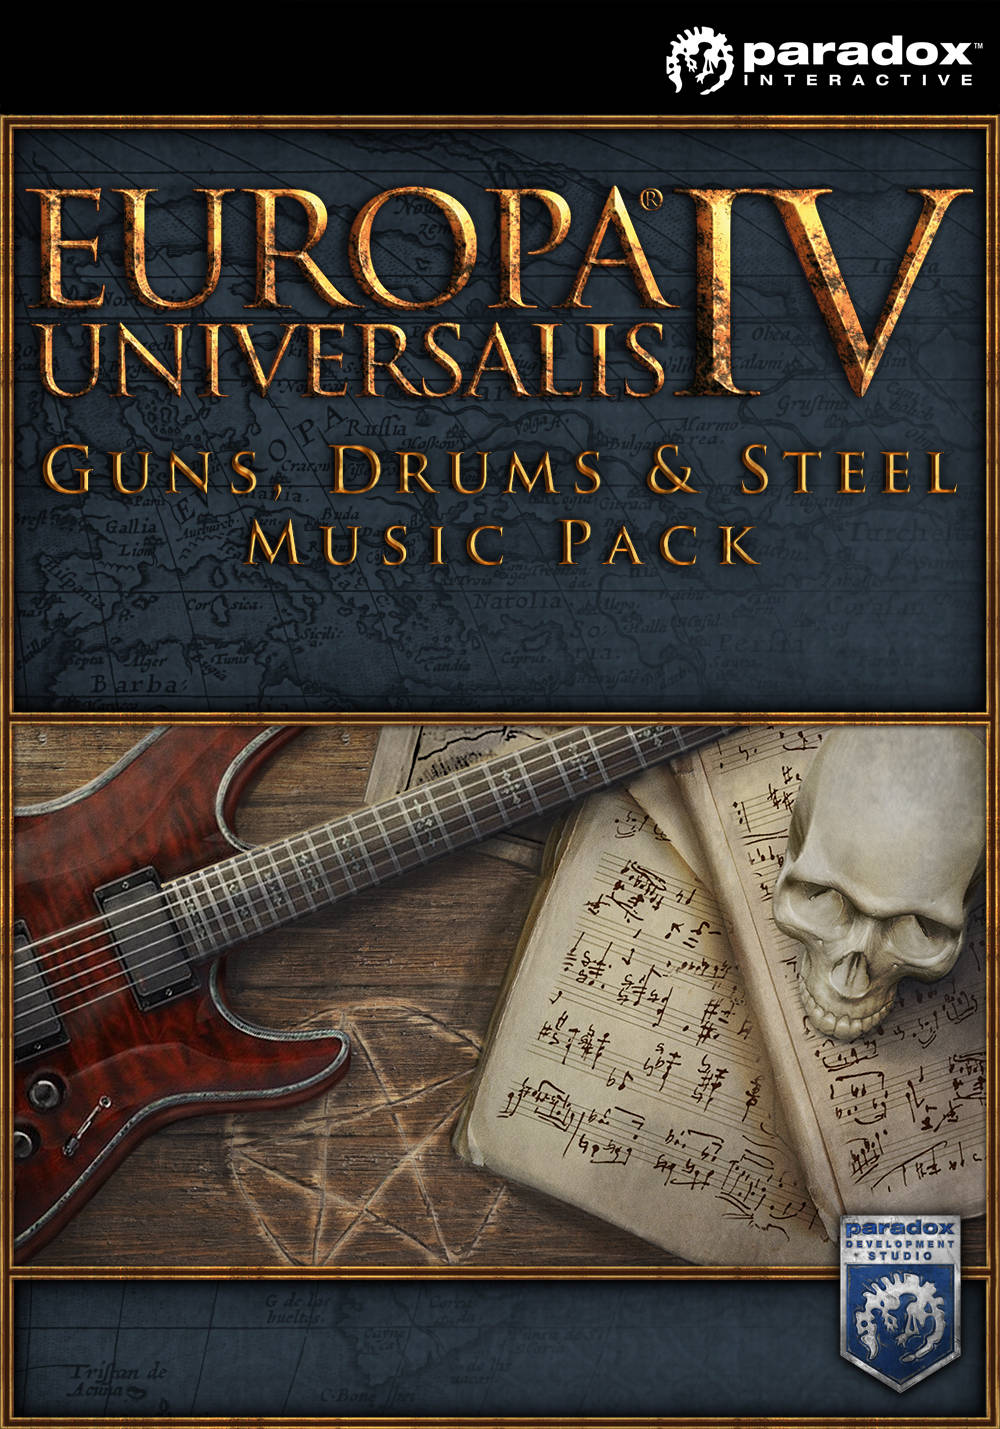 Europa Universalis IV: Guns, Drums and Steel music pack